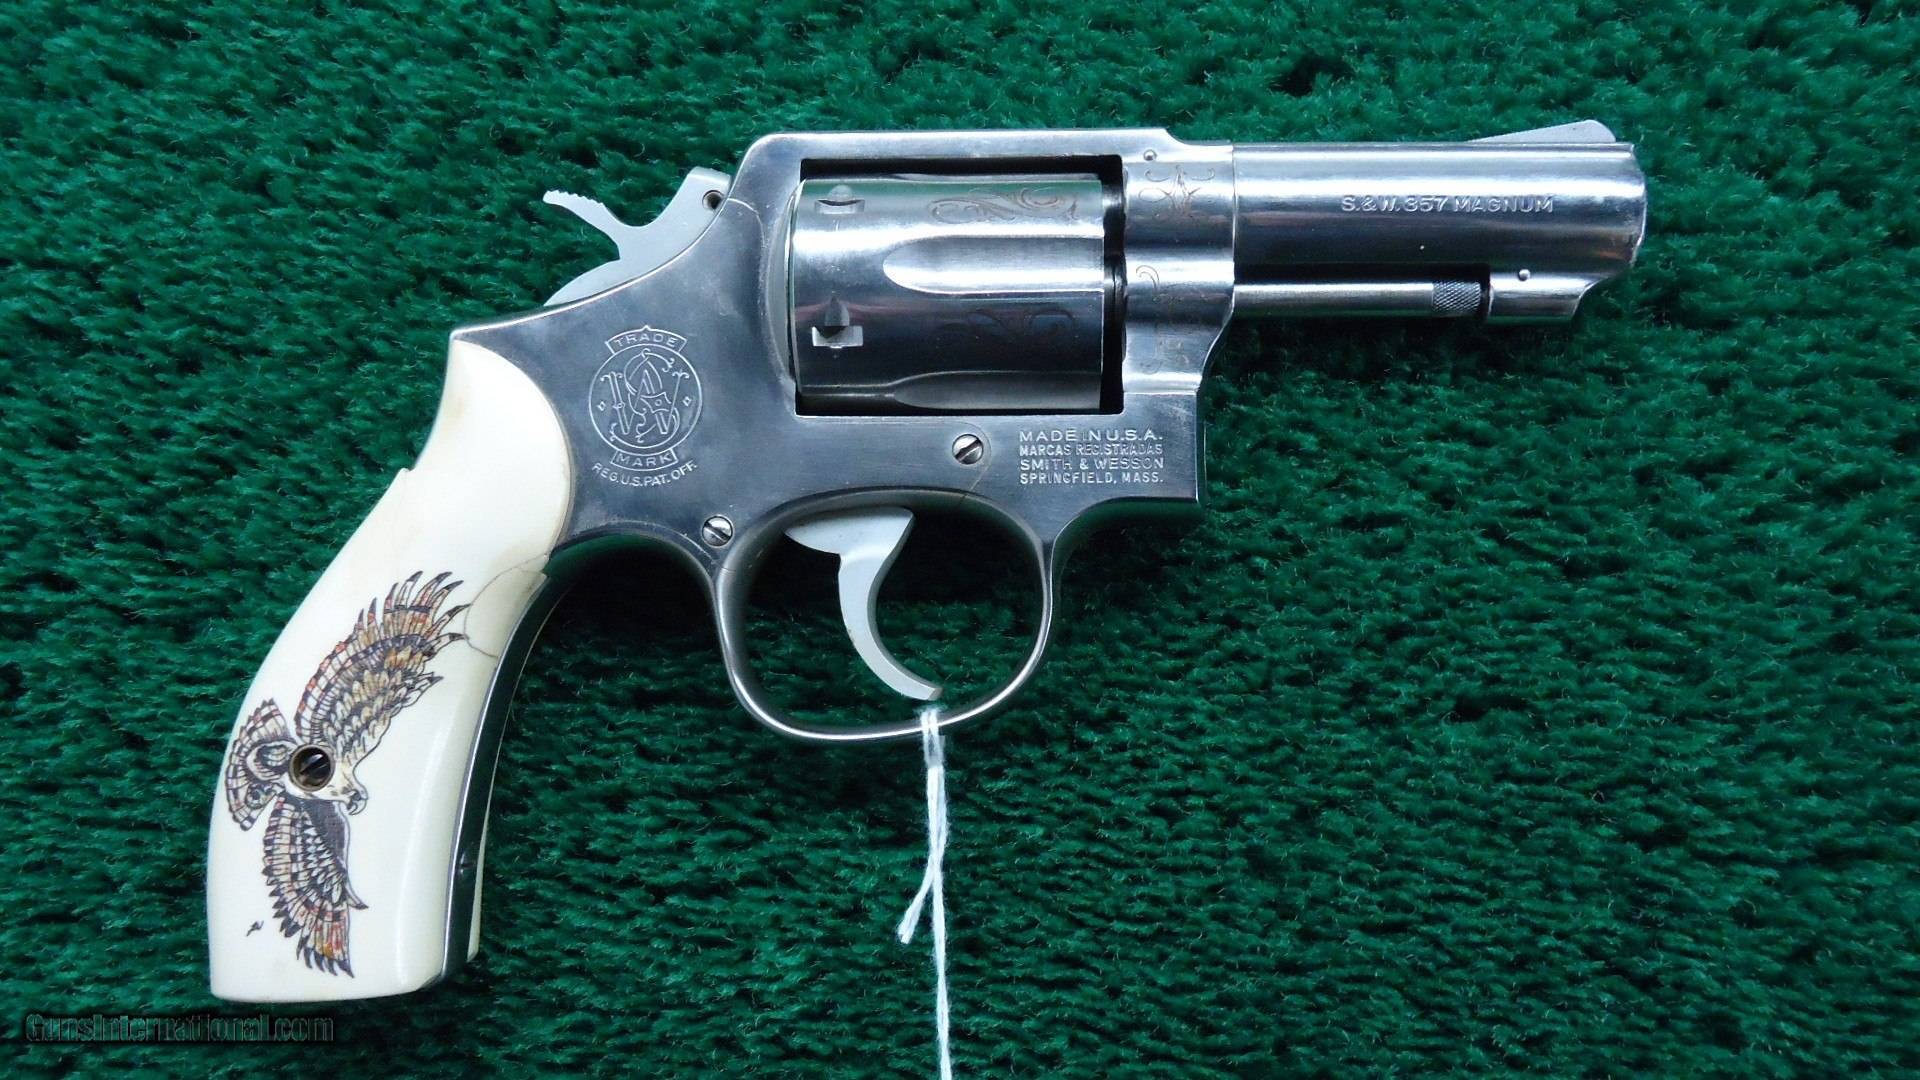 Smith & wesson model 625 - smith & wesson model 625